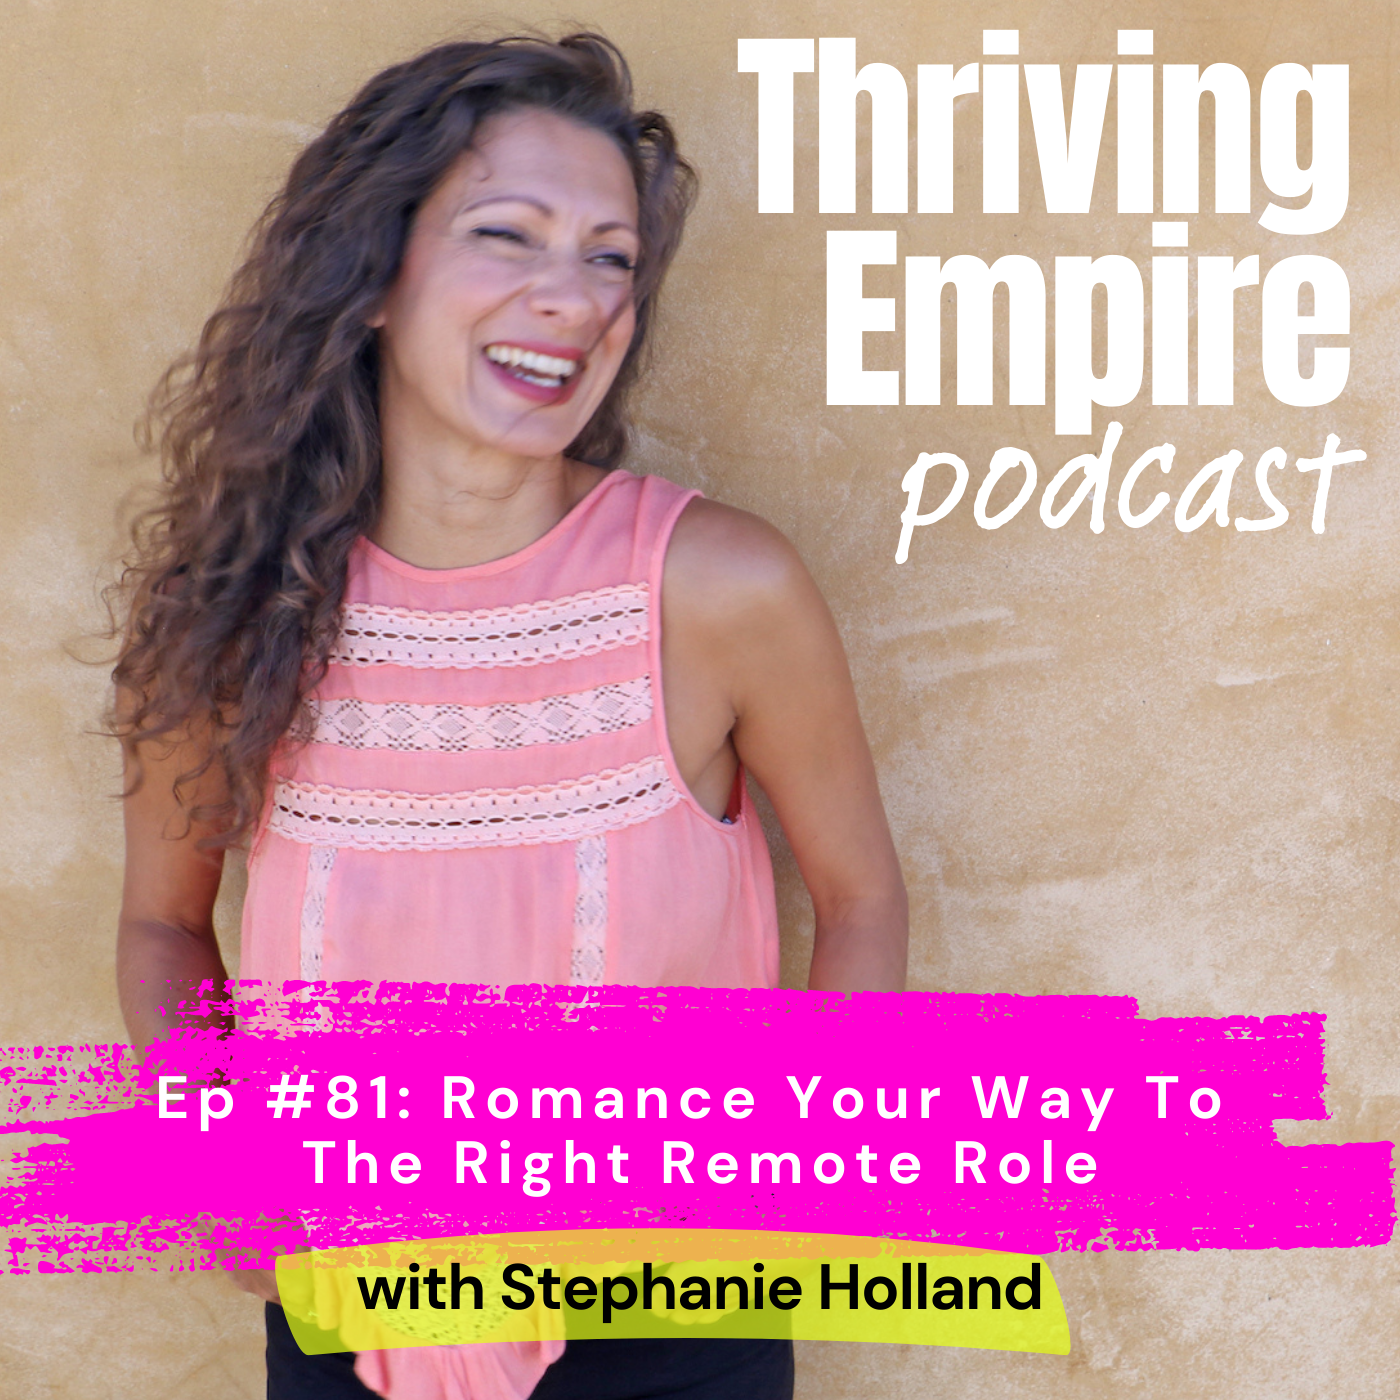 Ep #81: Romance Your Way To The Right Remote Role